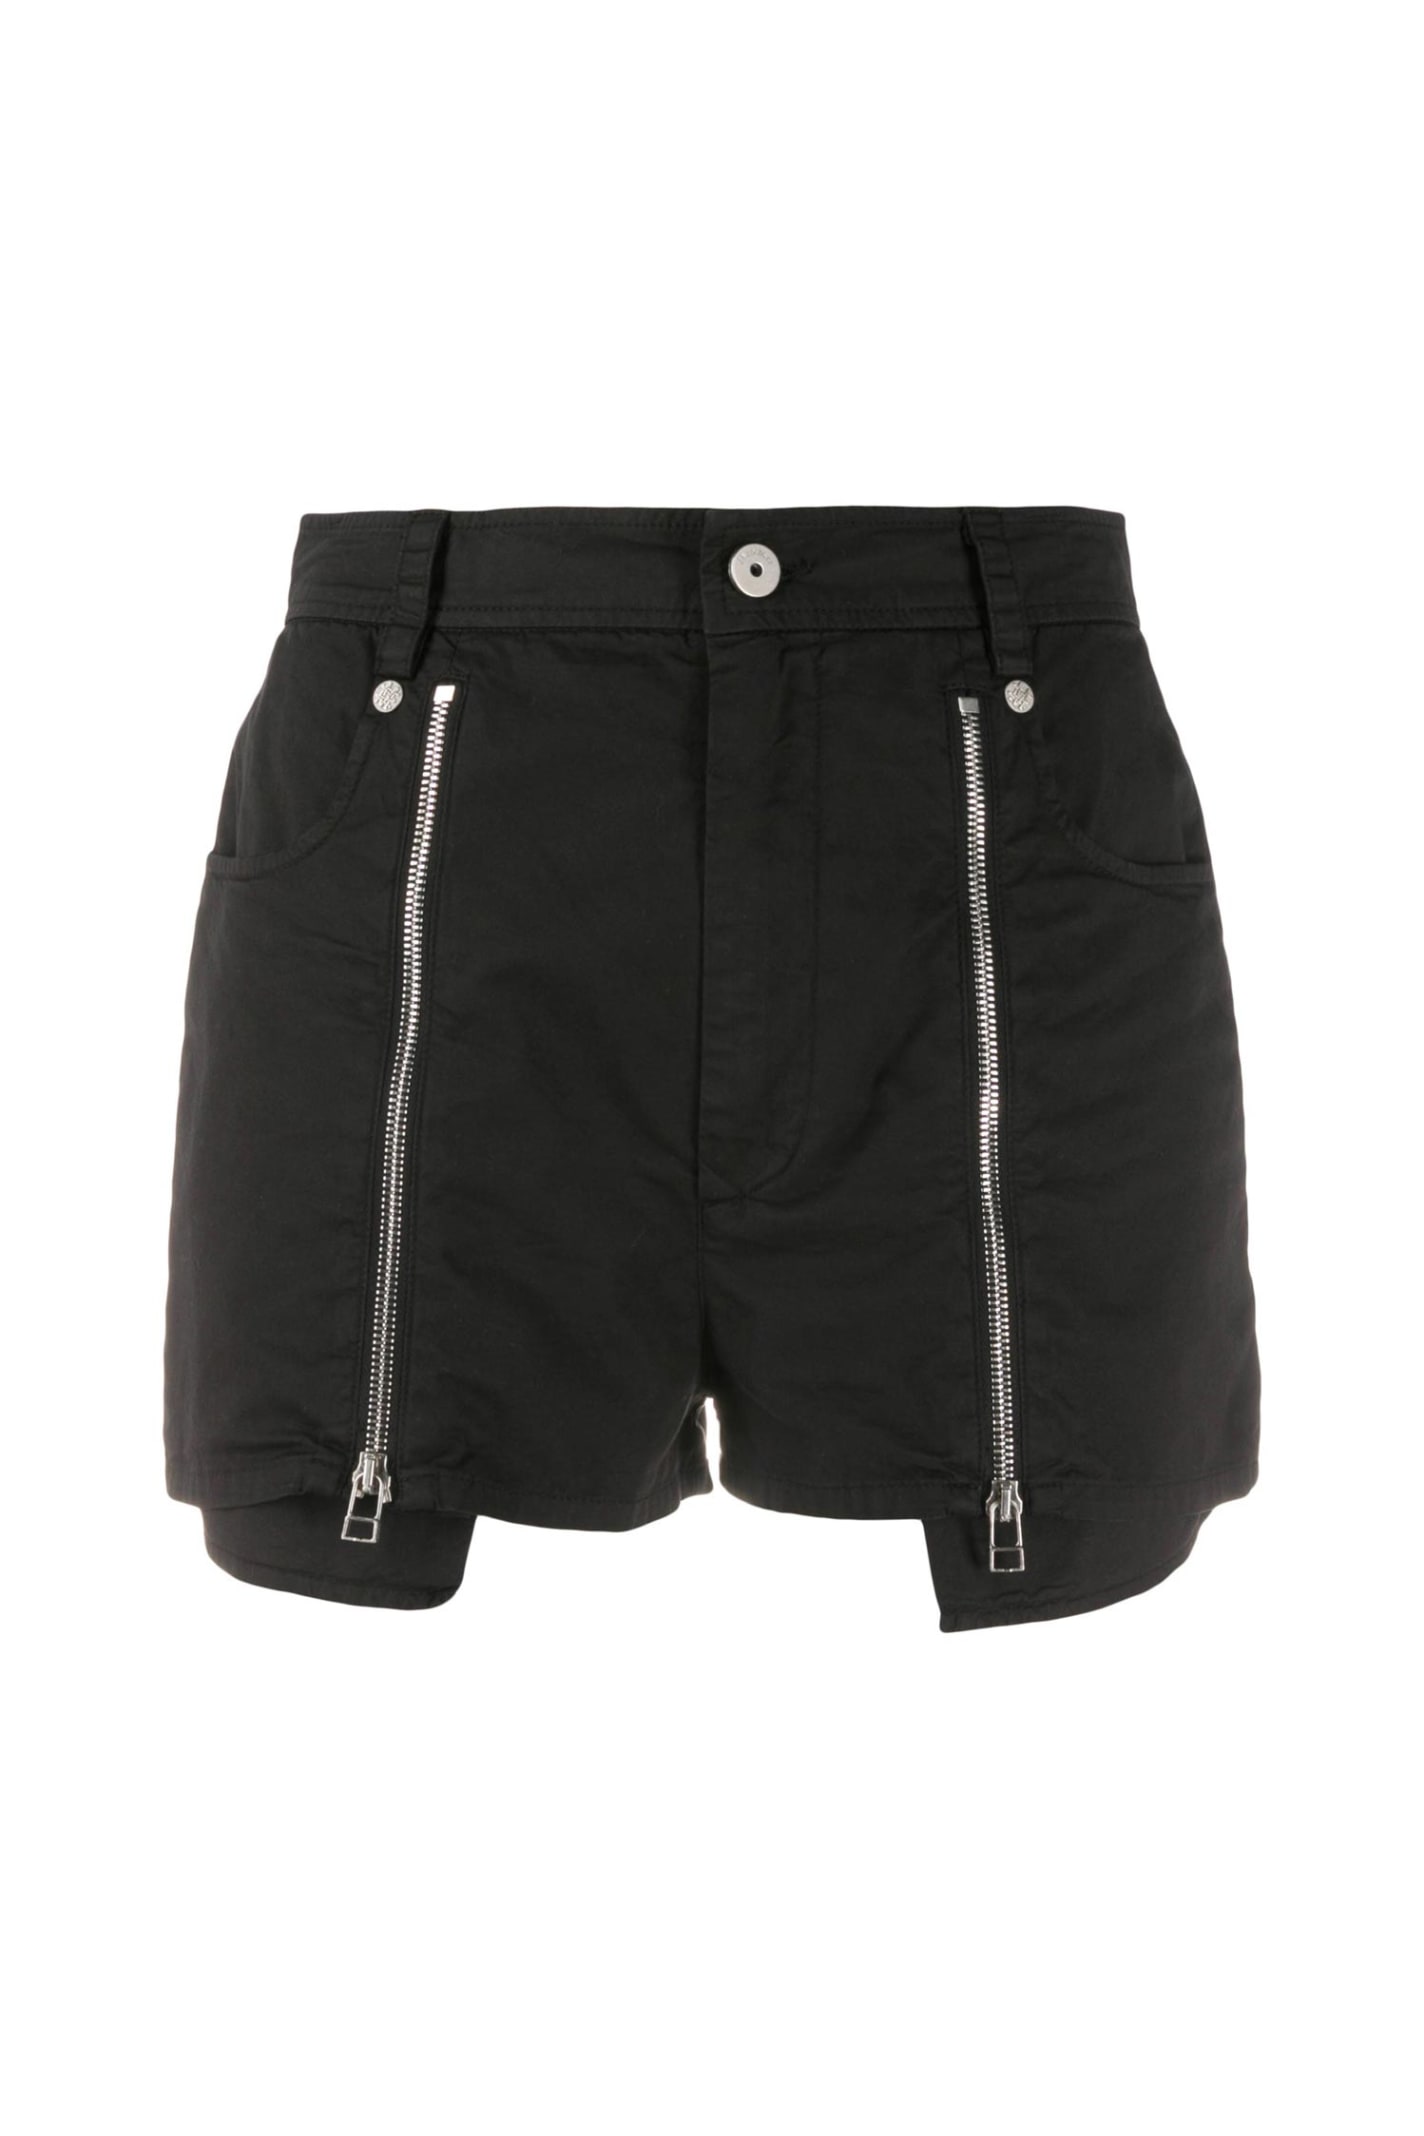 Mr & Mrs Italy Popeline Shorts For Woman With Zippers